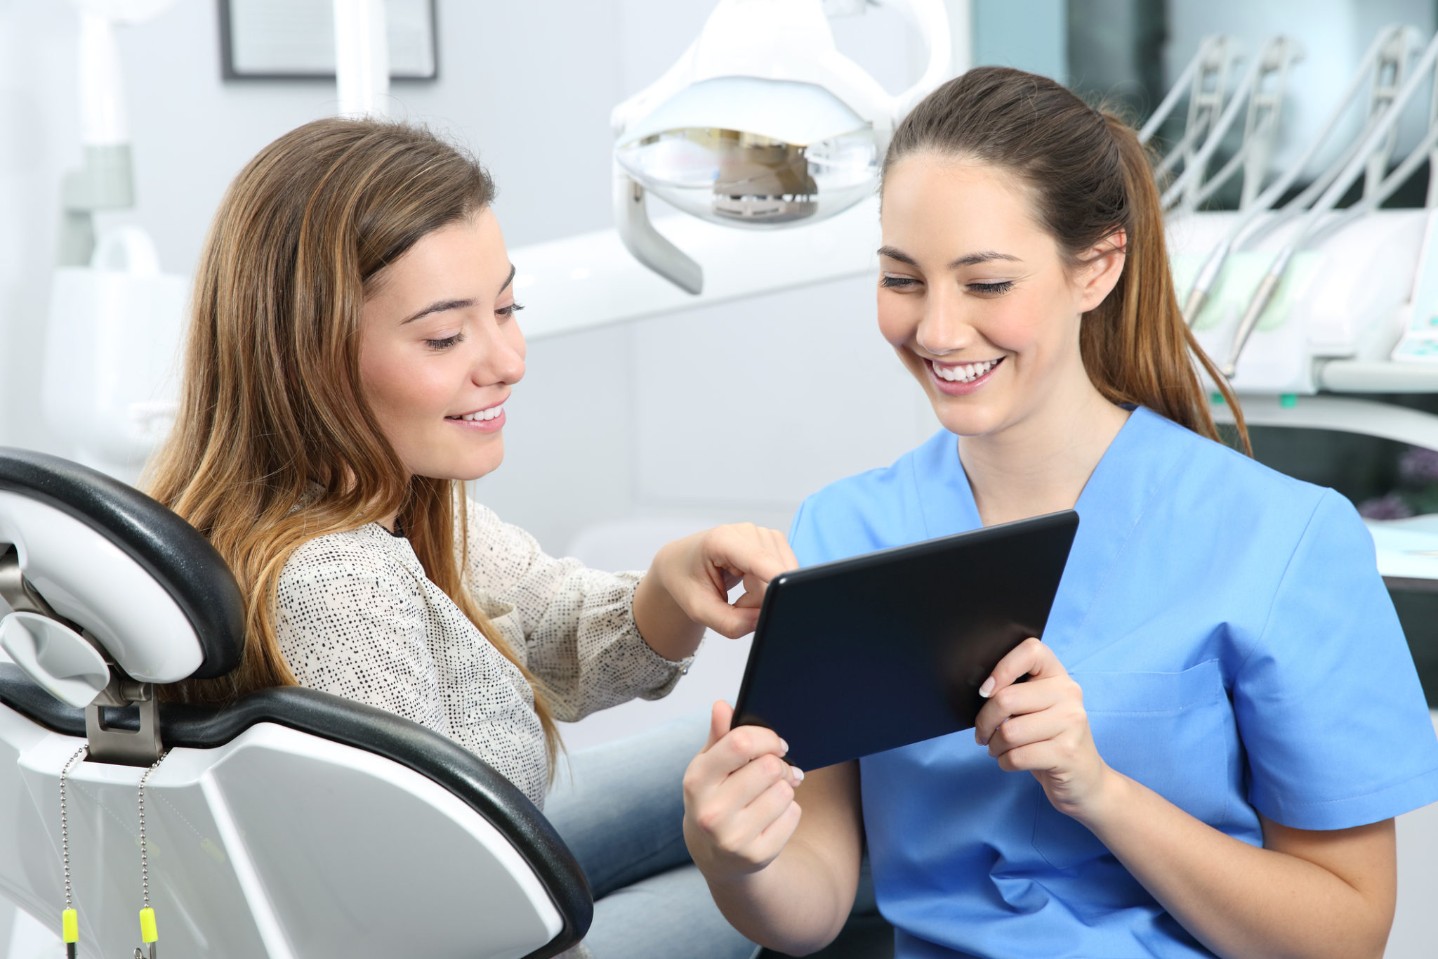 Dentist and patient choosing treatment